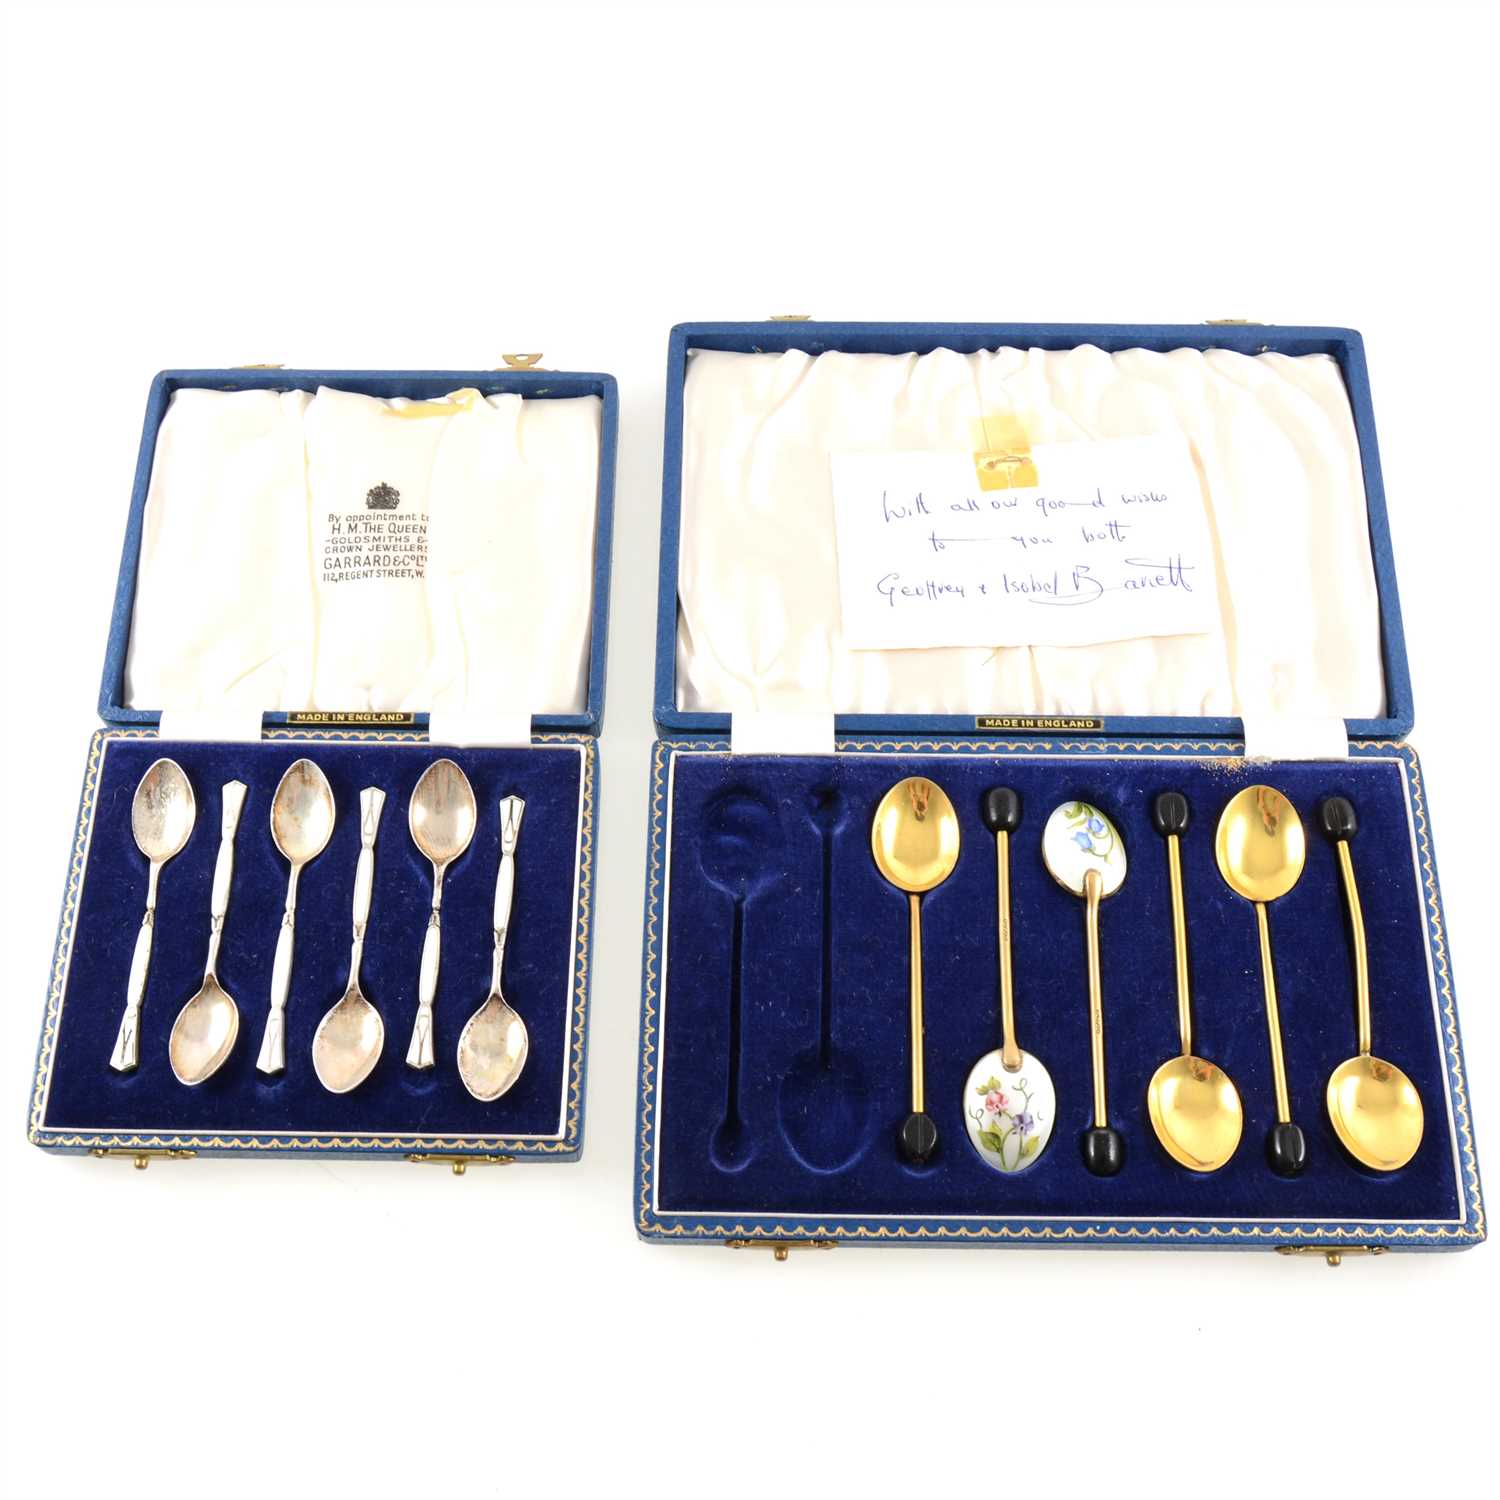 Lot 204 - A cased set of six silver and enamelled coffee spoons, Birmingham 1960, a cased set of white metal and enamelled pickle forks, marked "925S", and a part set of gilded coffee bean spoons.